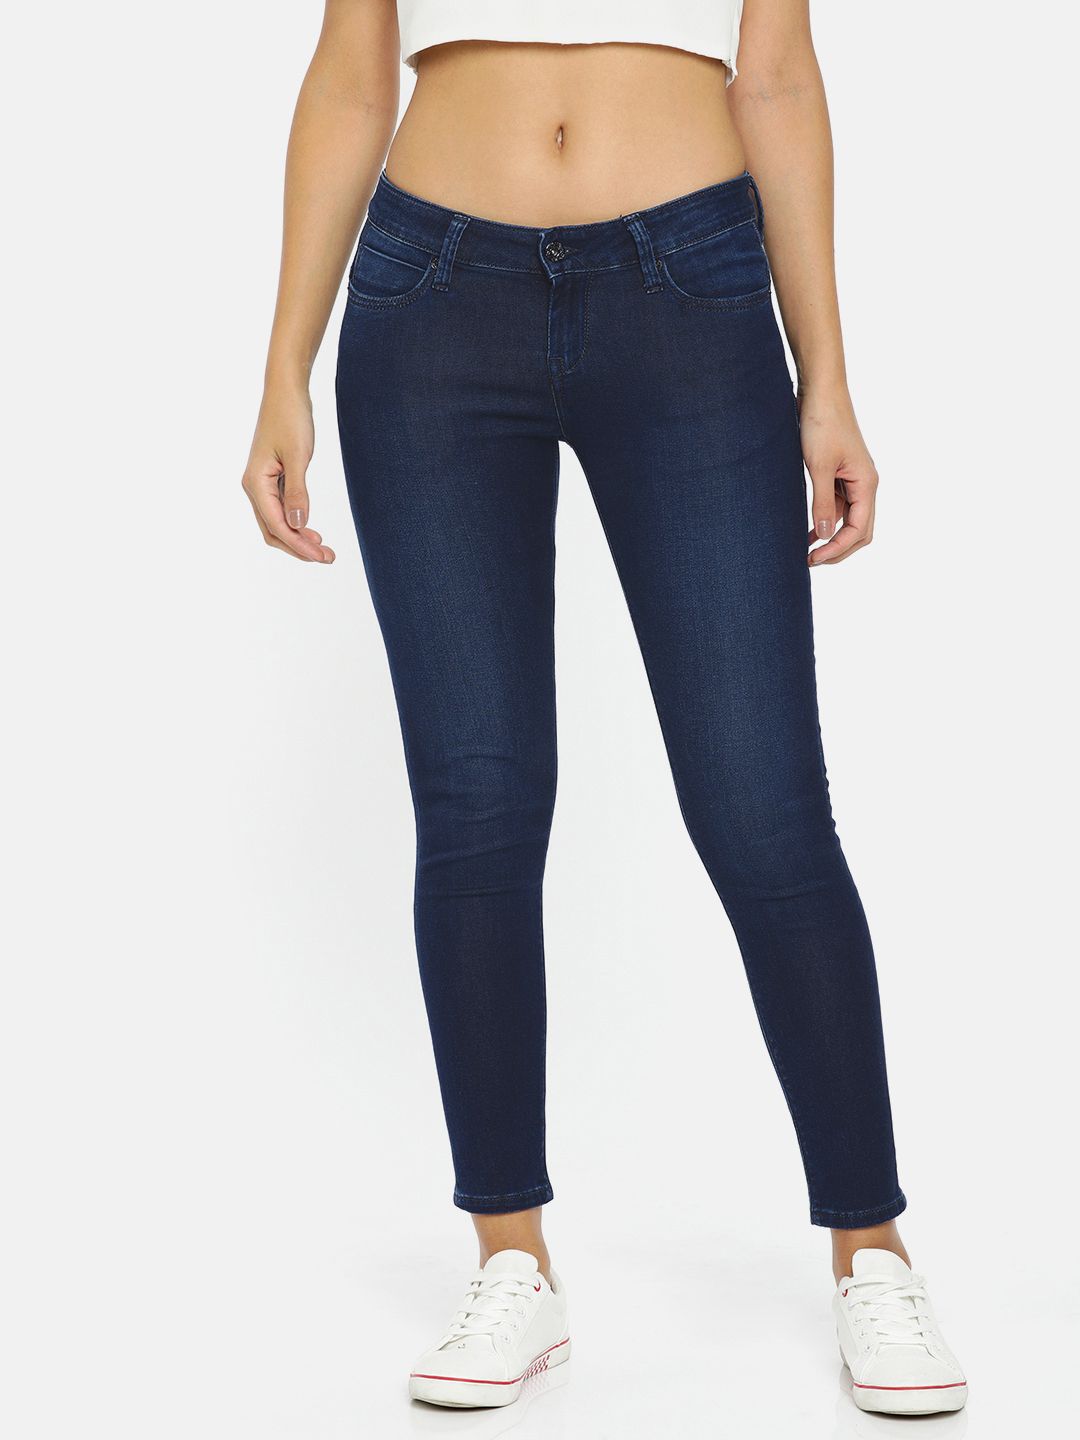 Pepe Jeans Women Navy Blue Tansey Slim Fit Mid-Rise Clean Look Stretchable Jeans Price in India